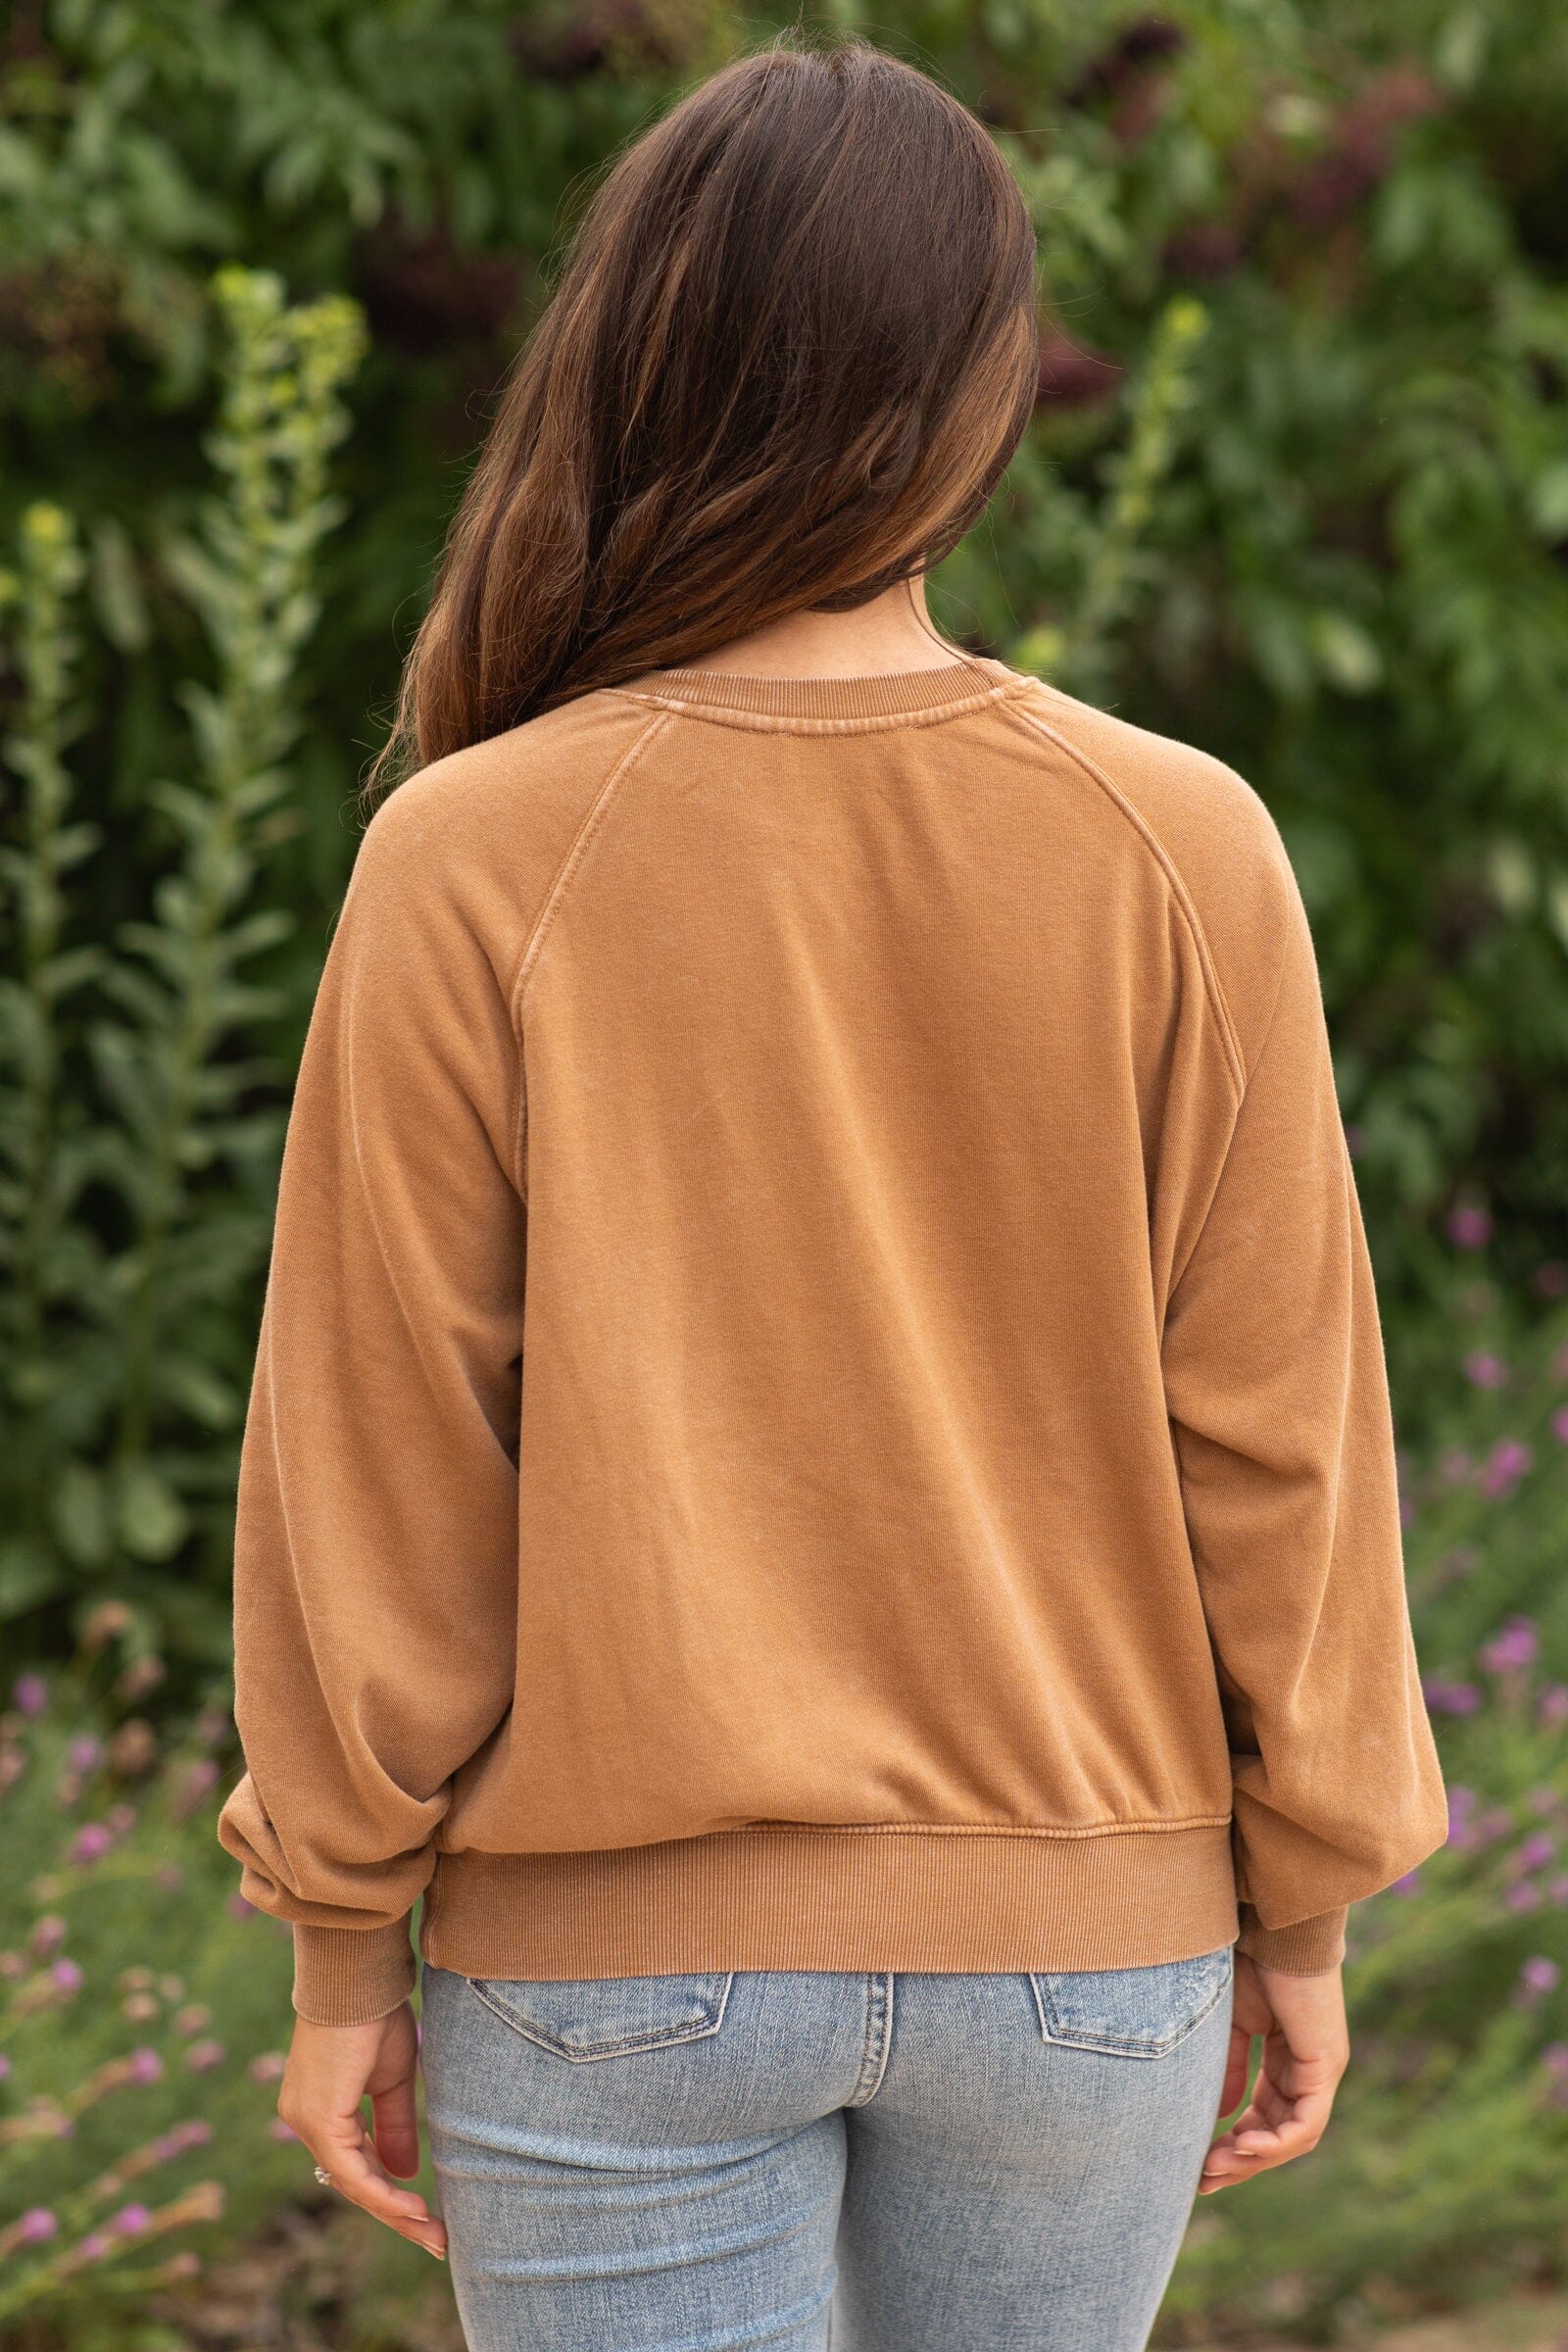 Cinnamon Washed Sweatshirt With Seam Detail - Filly Flair